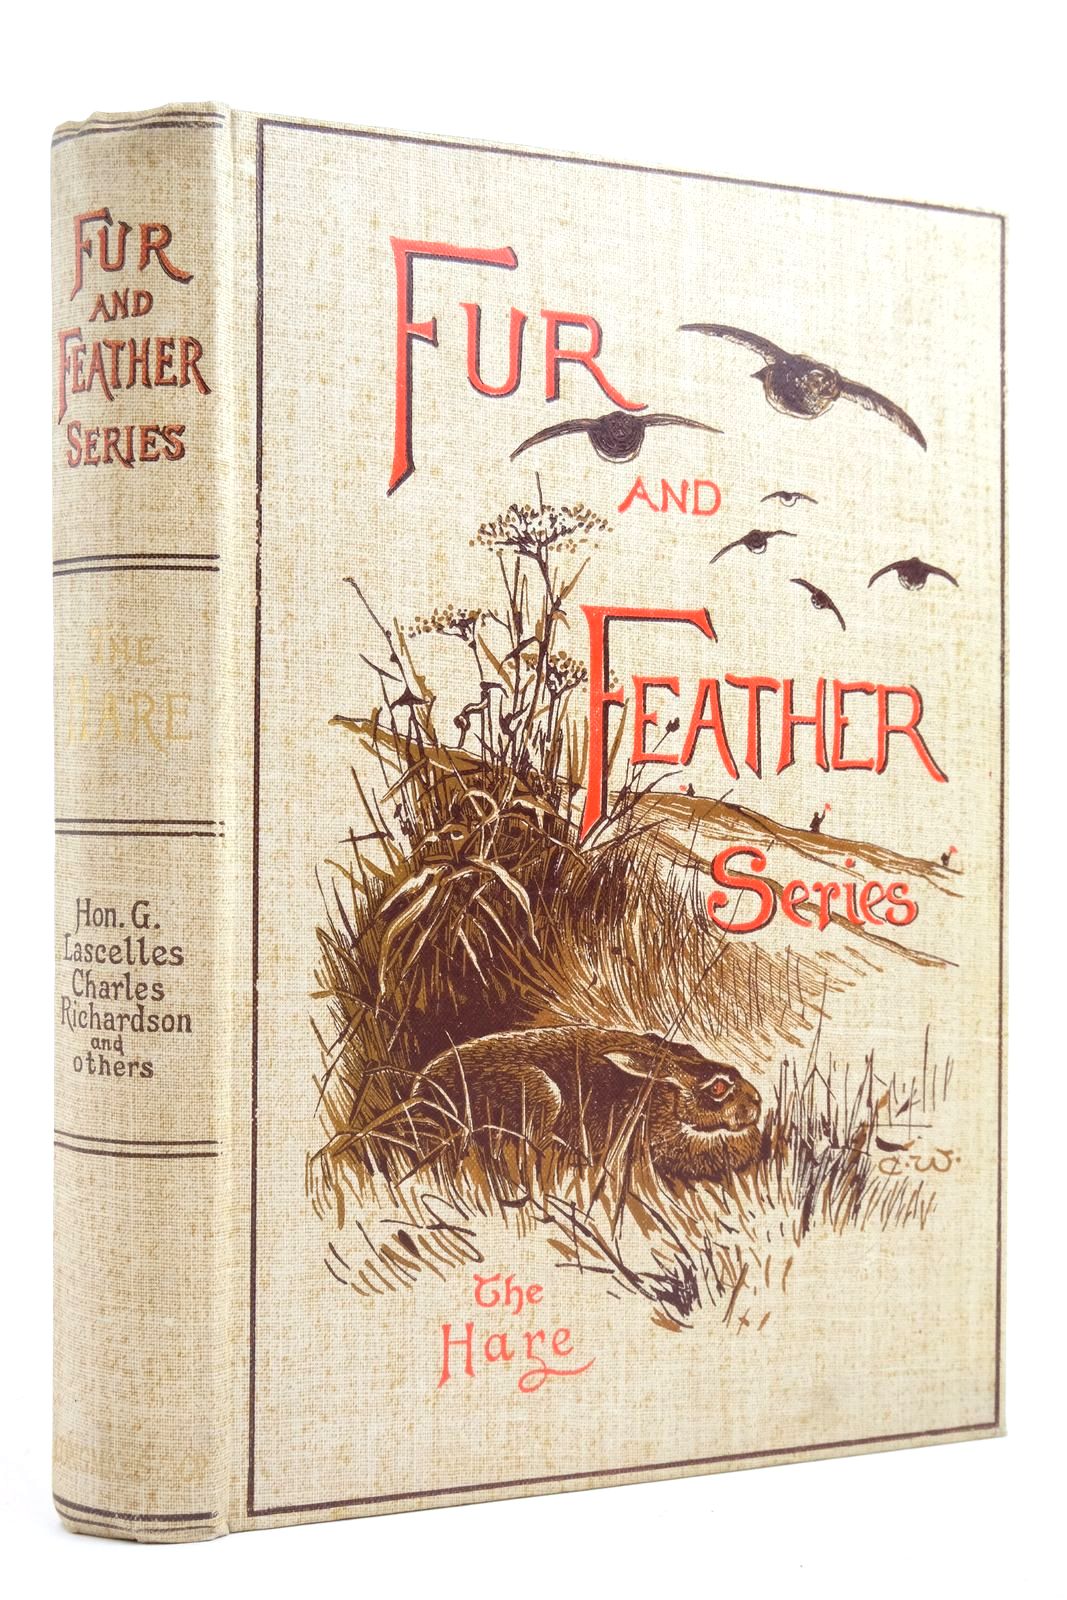 Photo of THE HARE written by MacPherson, H.A.
Lascelles, Gerald
Richardson, Charles
Gibbons, J.S.
Longman, G.H.
Herbert, Kenney illustrated by Thorburn, Archibald
Whymper, Charles
et al., published by Longmans, Green & Co. (STOCK CODE: 2136038)  for sale by Stella & Rose's Books